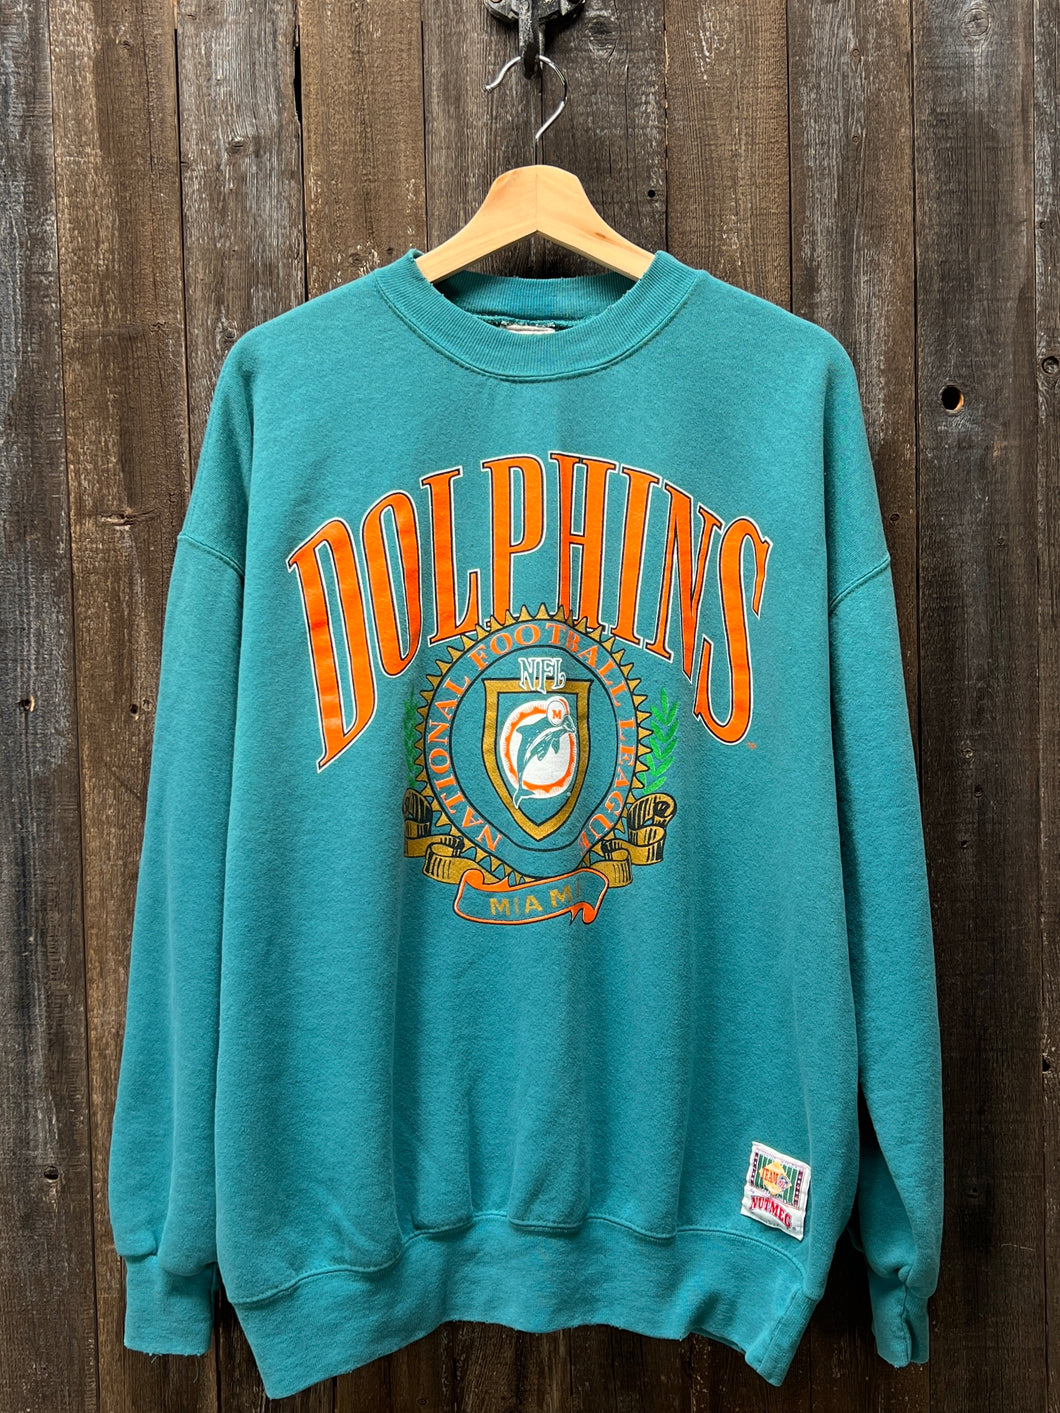 Dolphins Sweatshirt -XL-Customize Your Embroidery Wording